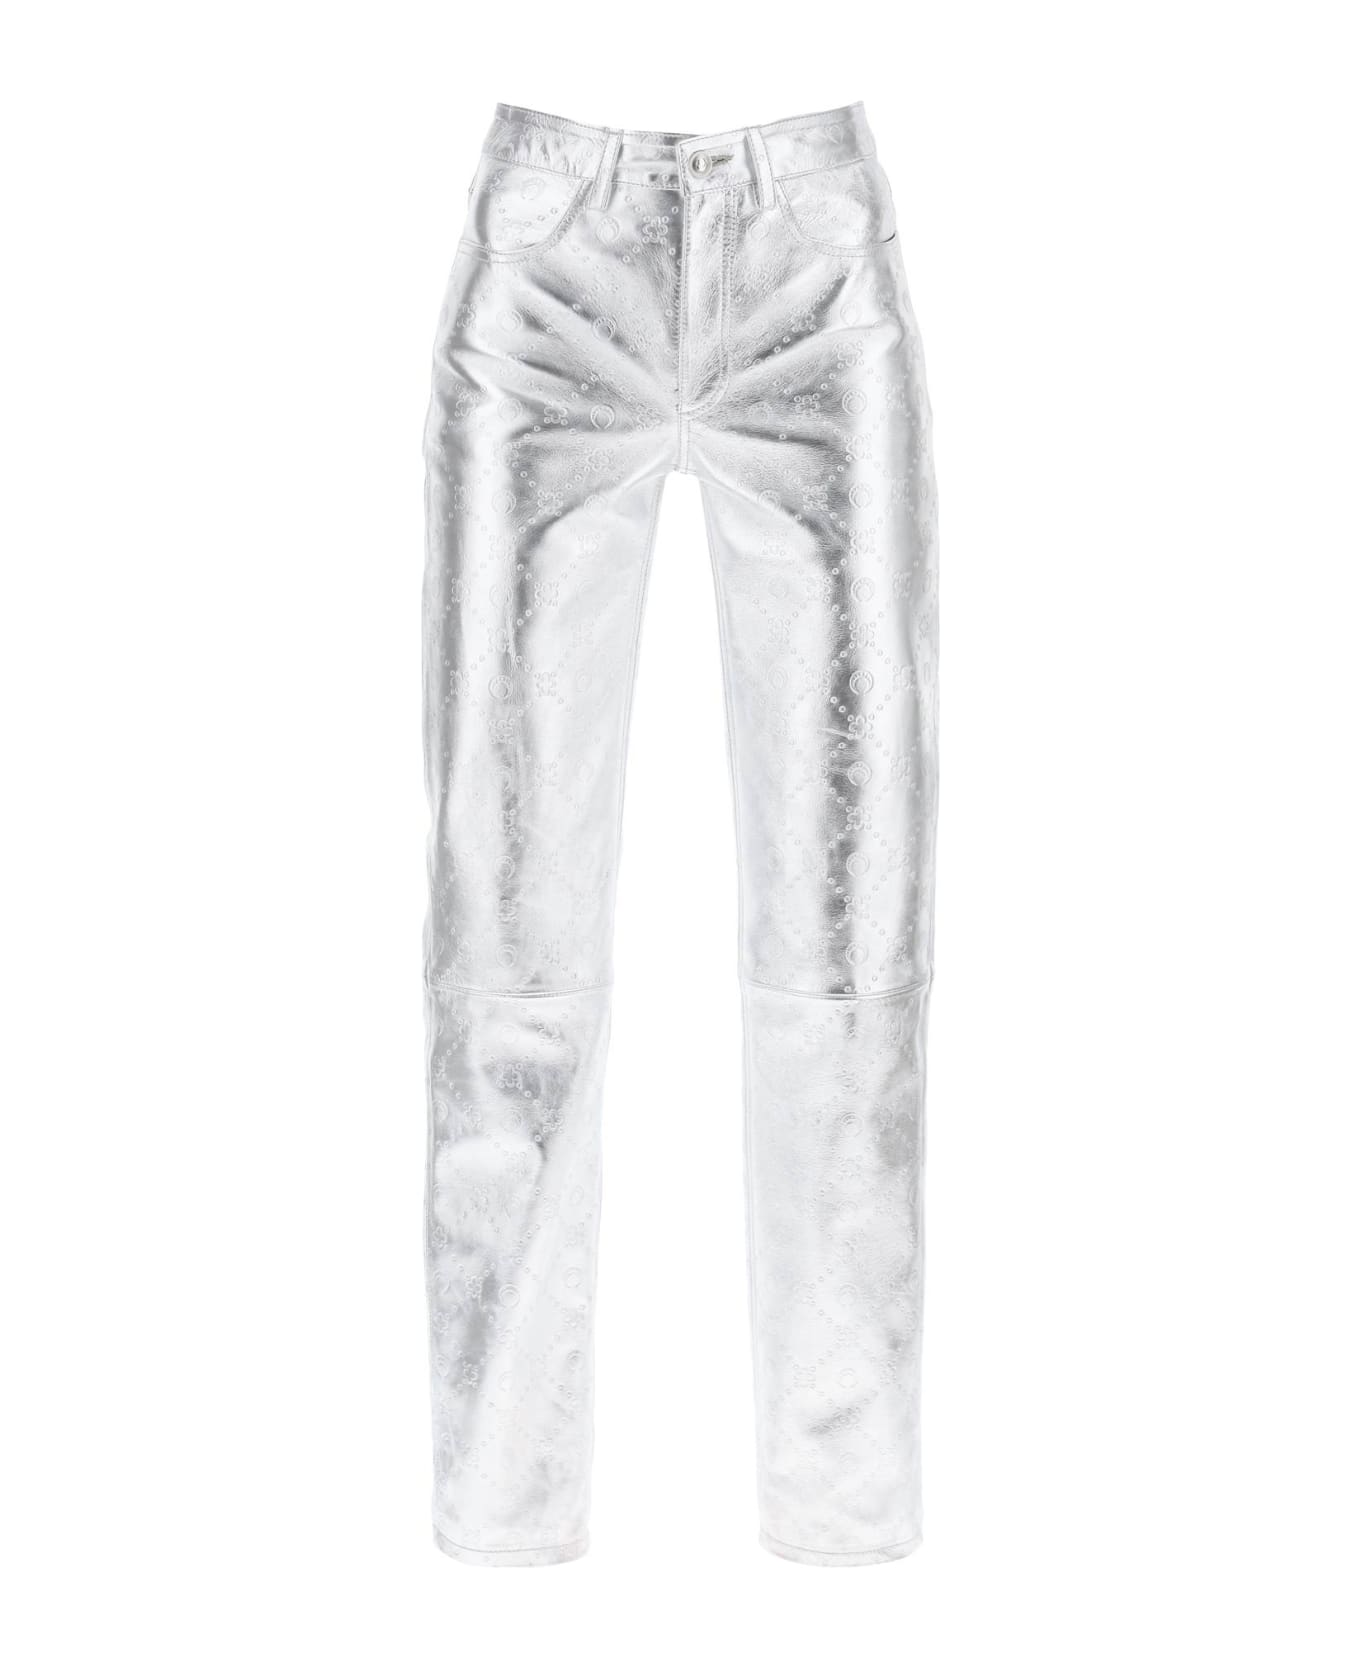 Marine Serre Moonogram Pants In Laminated Leather - SILVER (Silver)